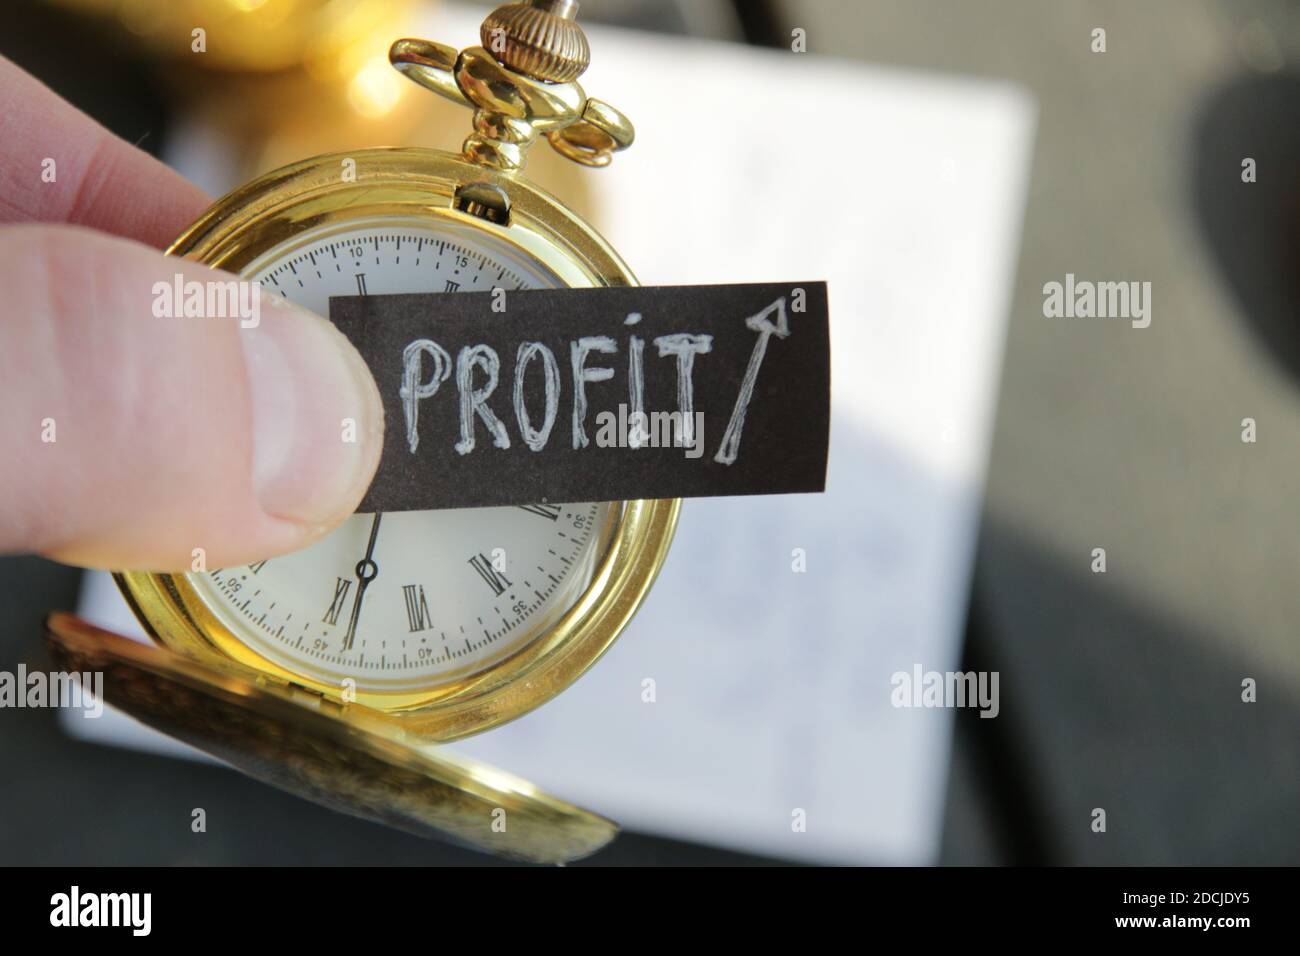 Profit growth concept. Inscription and gold pocket watch. Stock Photo